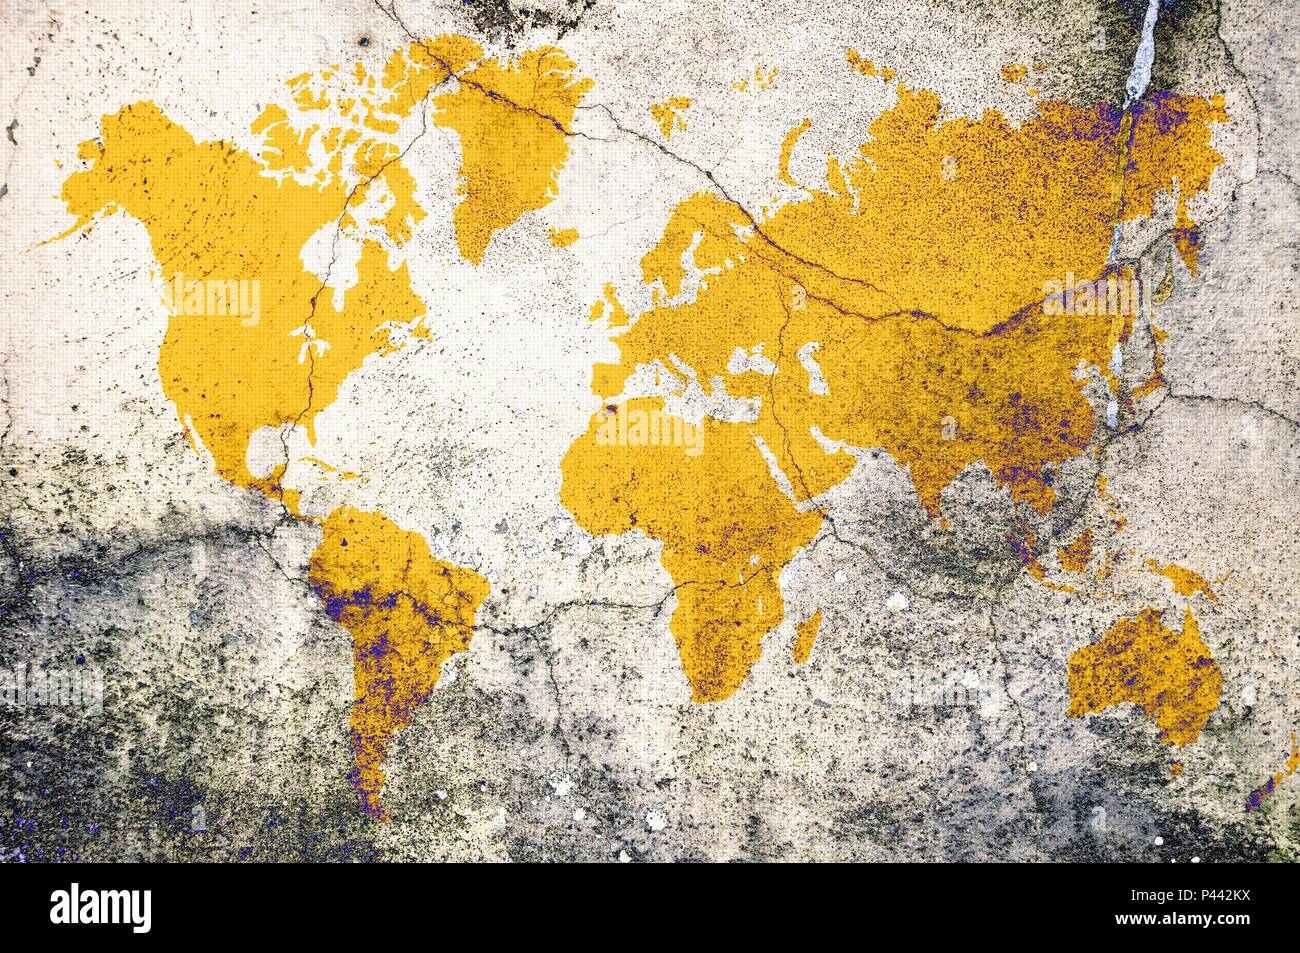 Yellow world map on damaged cracked concrete wall. Elements of this ...